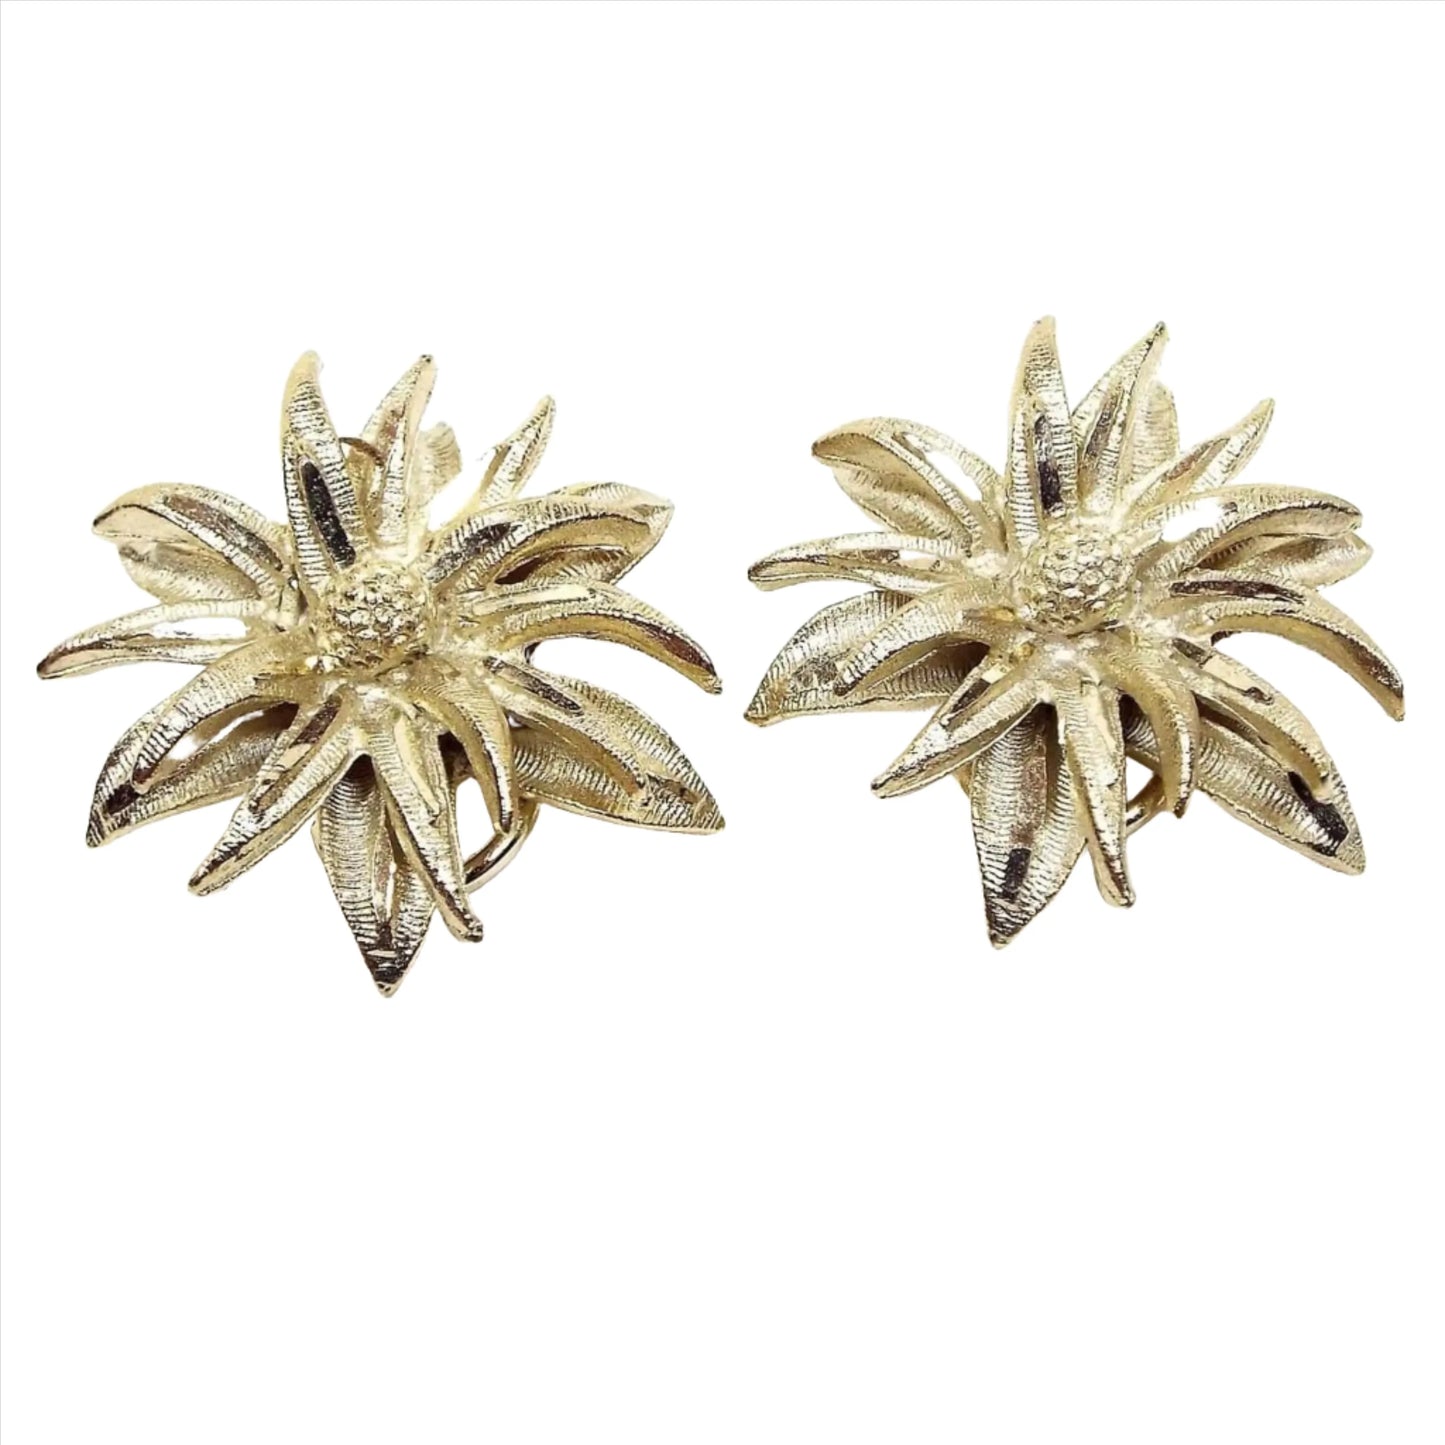 Front view of the retro vintage BSK floral earrings. They are textured gold tone in color with lots of long tapered style petals making up the flower design.